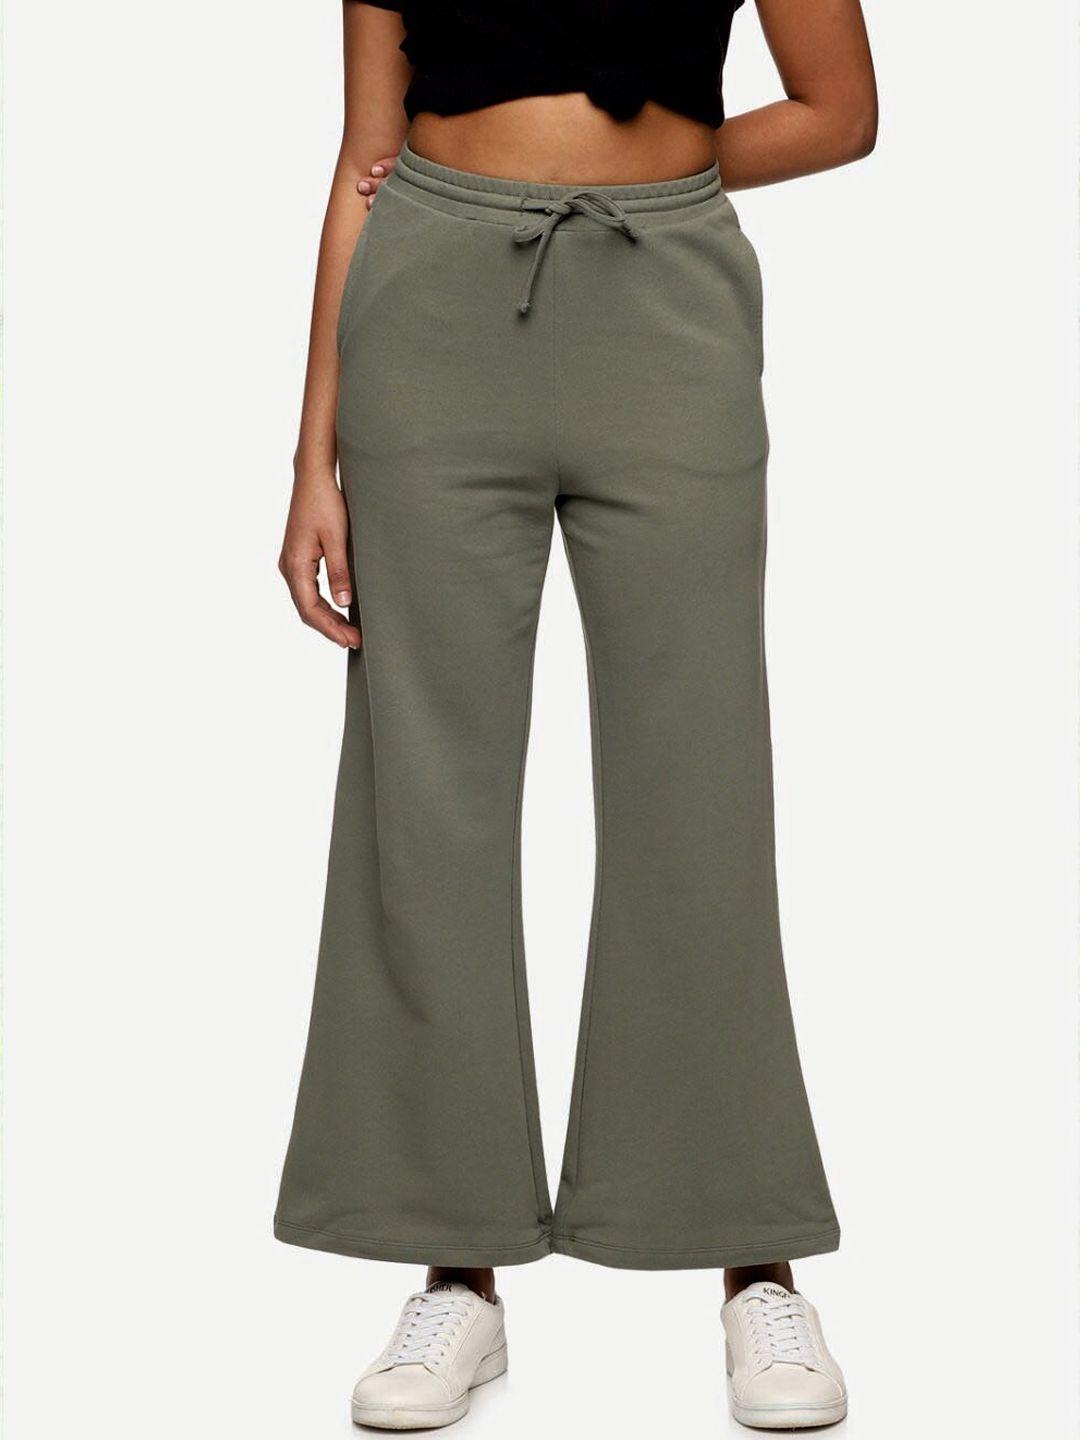 here&now women fairtrade cotton track pant